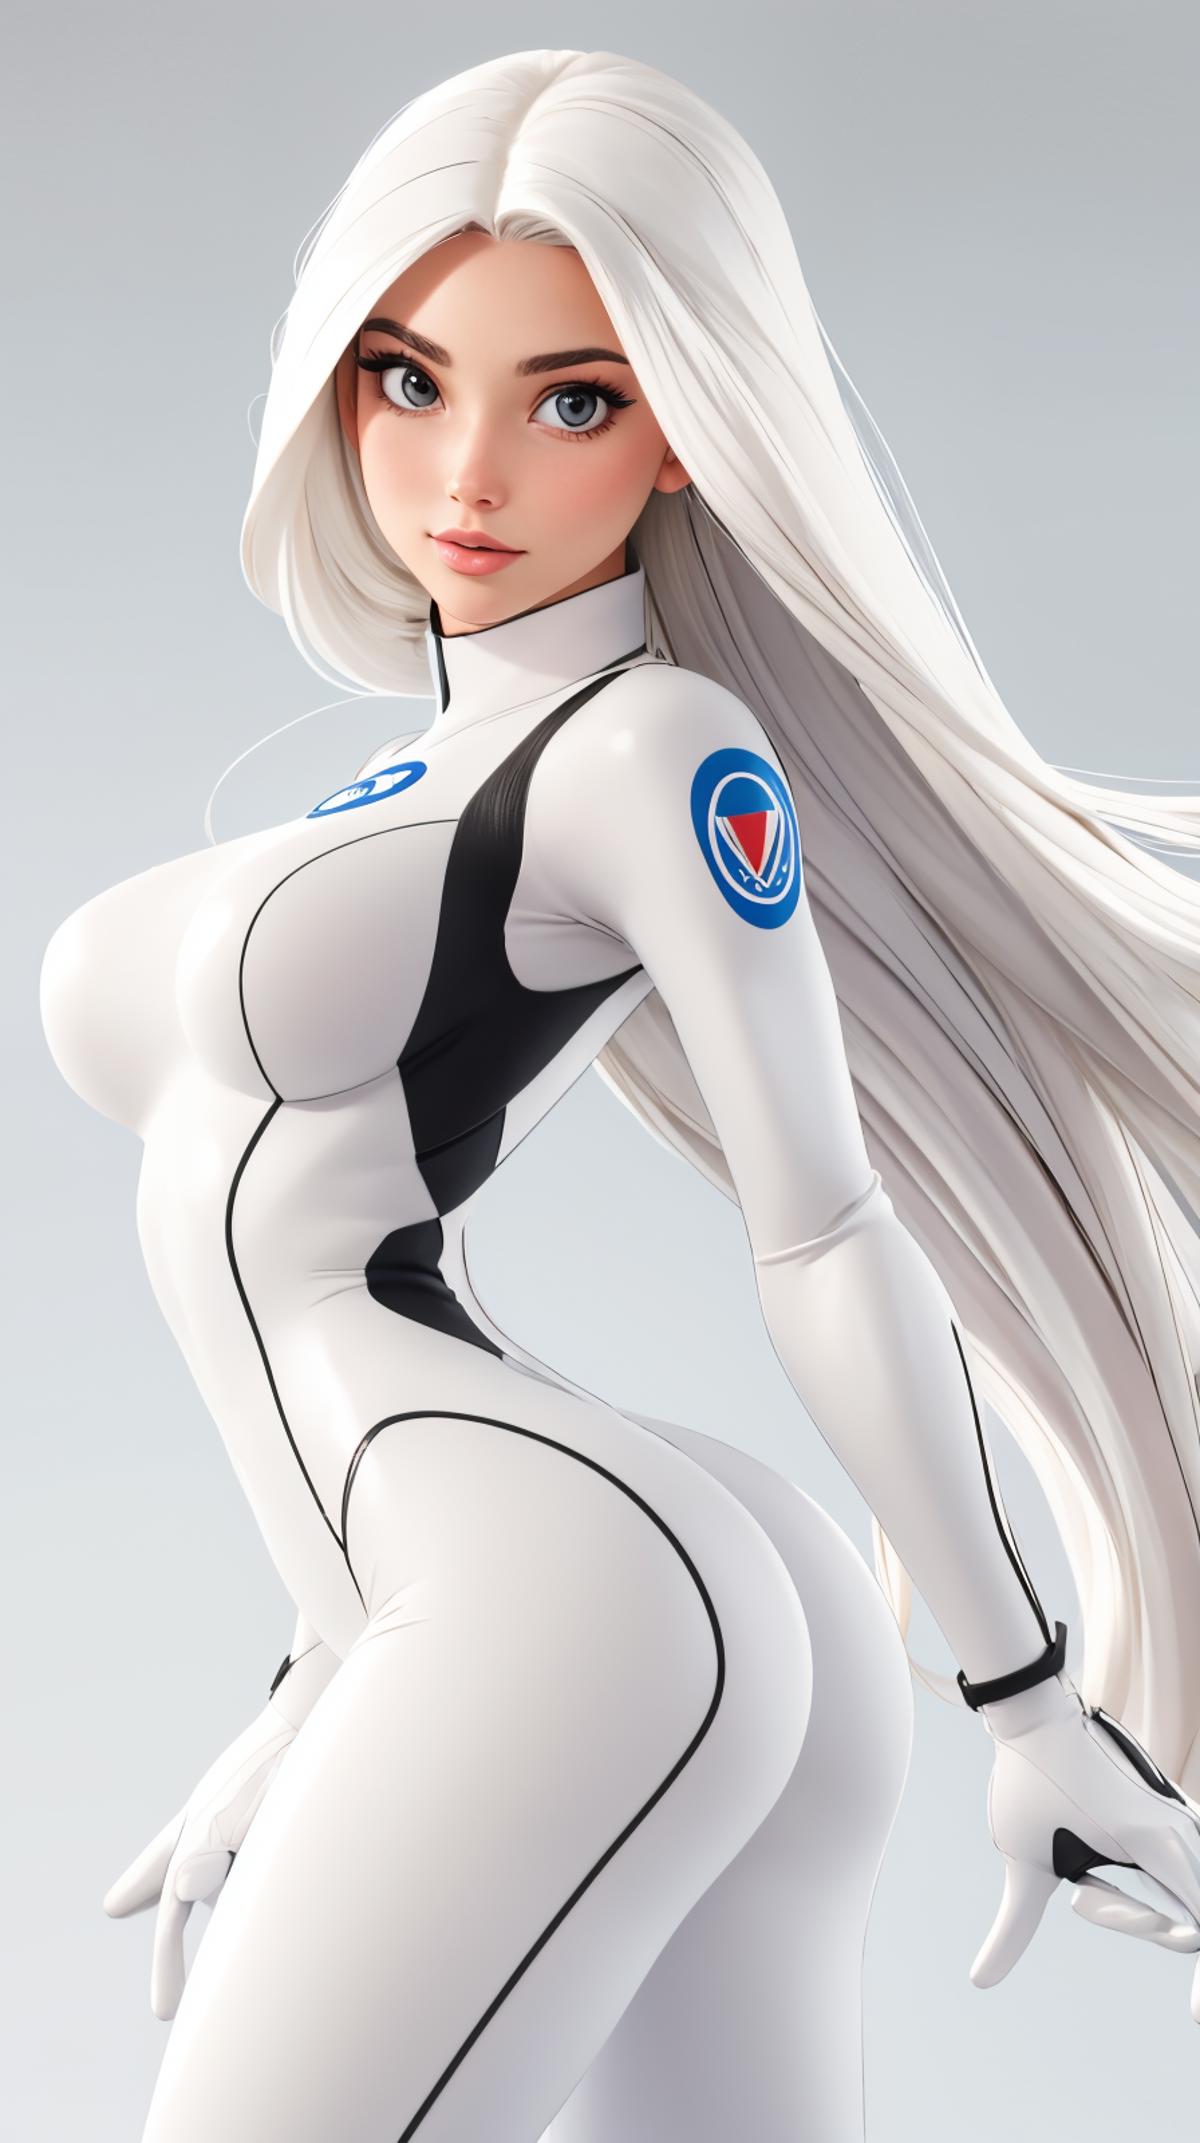 A 3D rendered female character in a white and black outfit with her hair blowing in the wind.